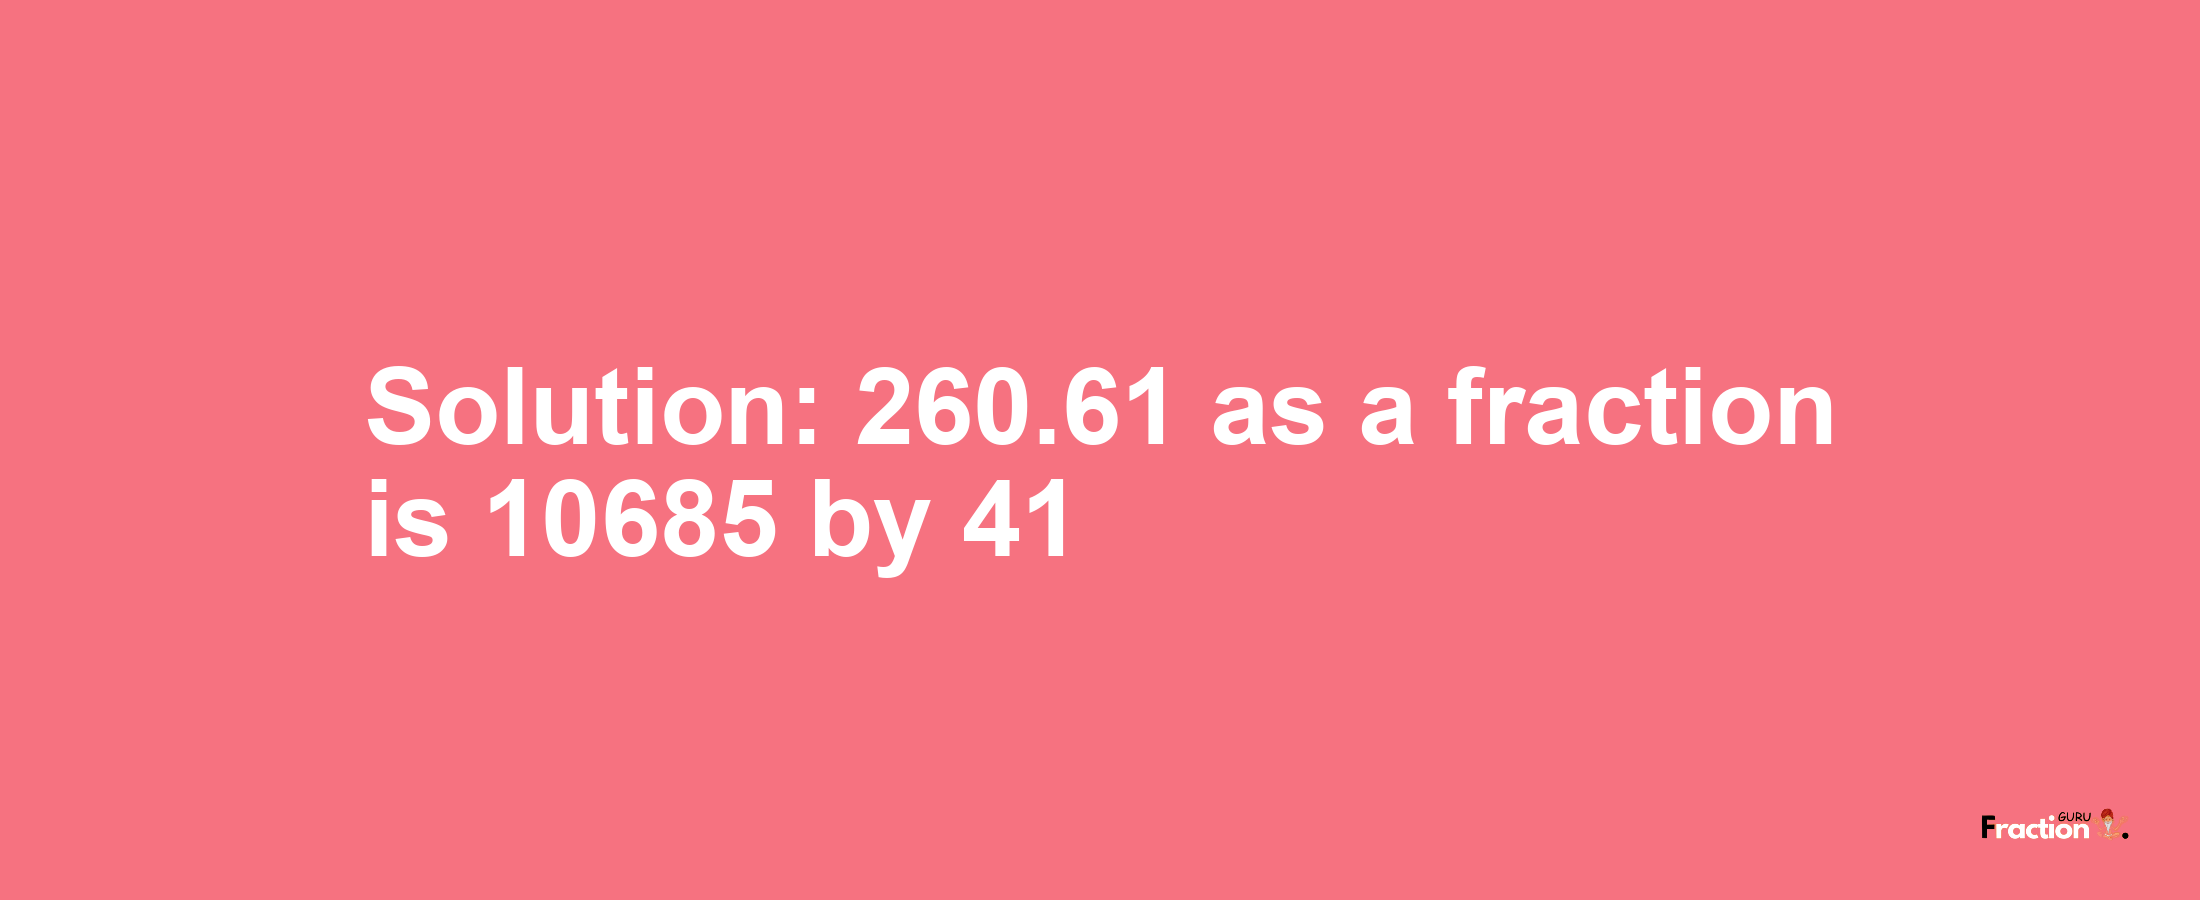 Solution:260.61 as a fraction is 10685/41